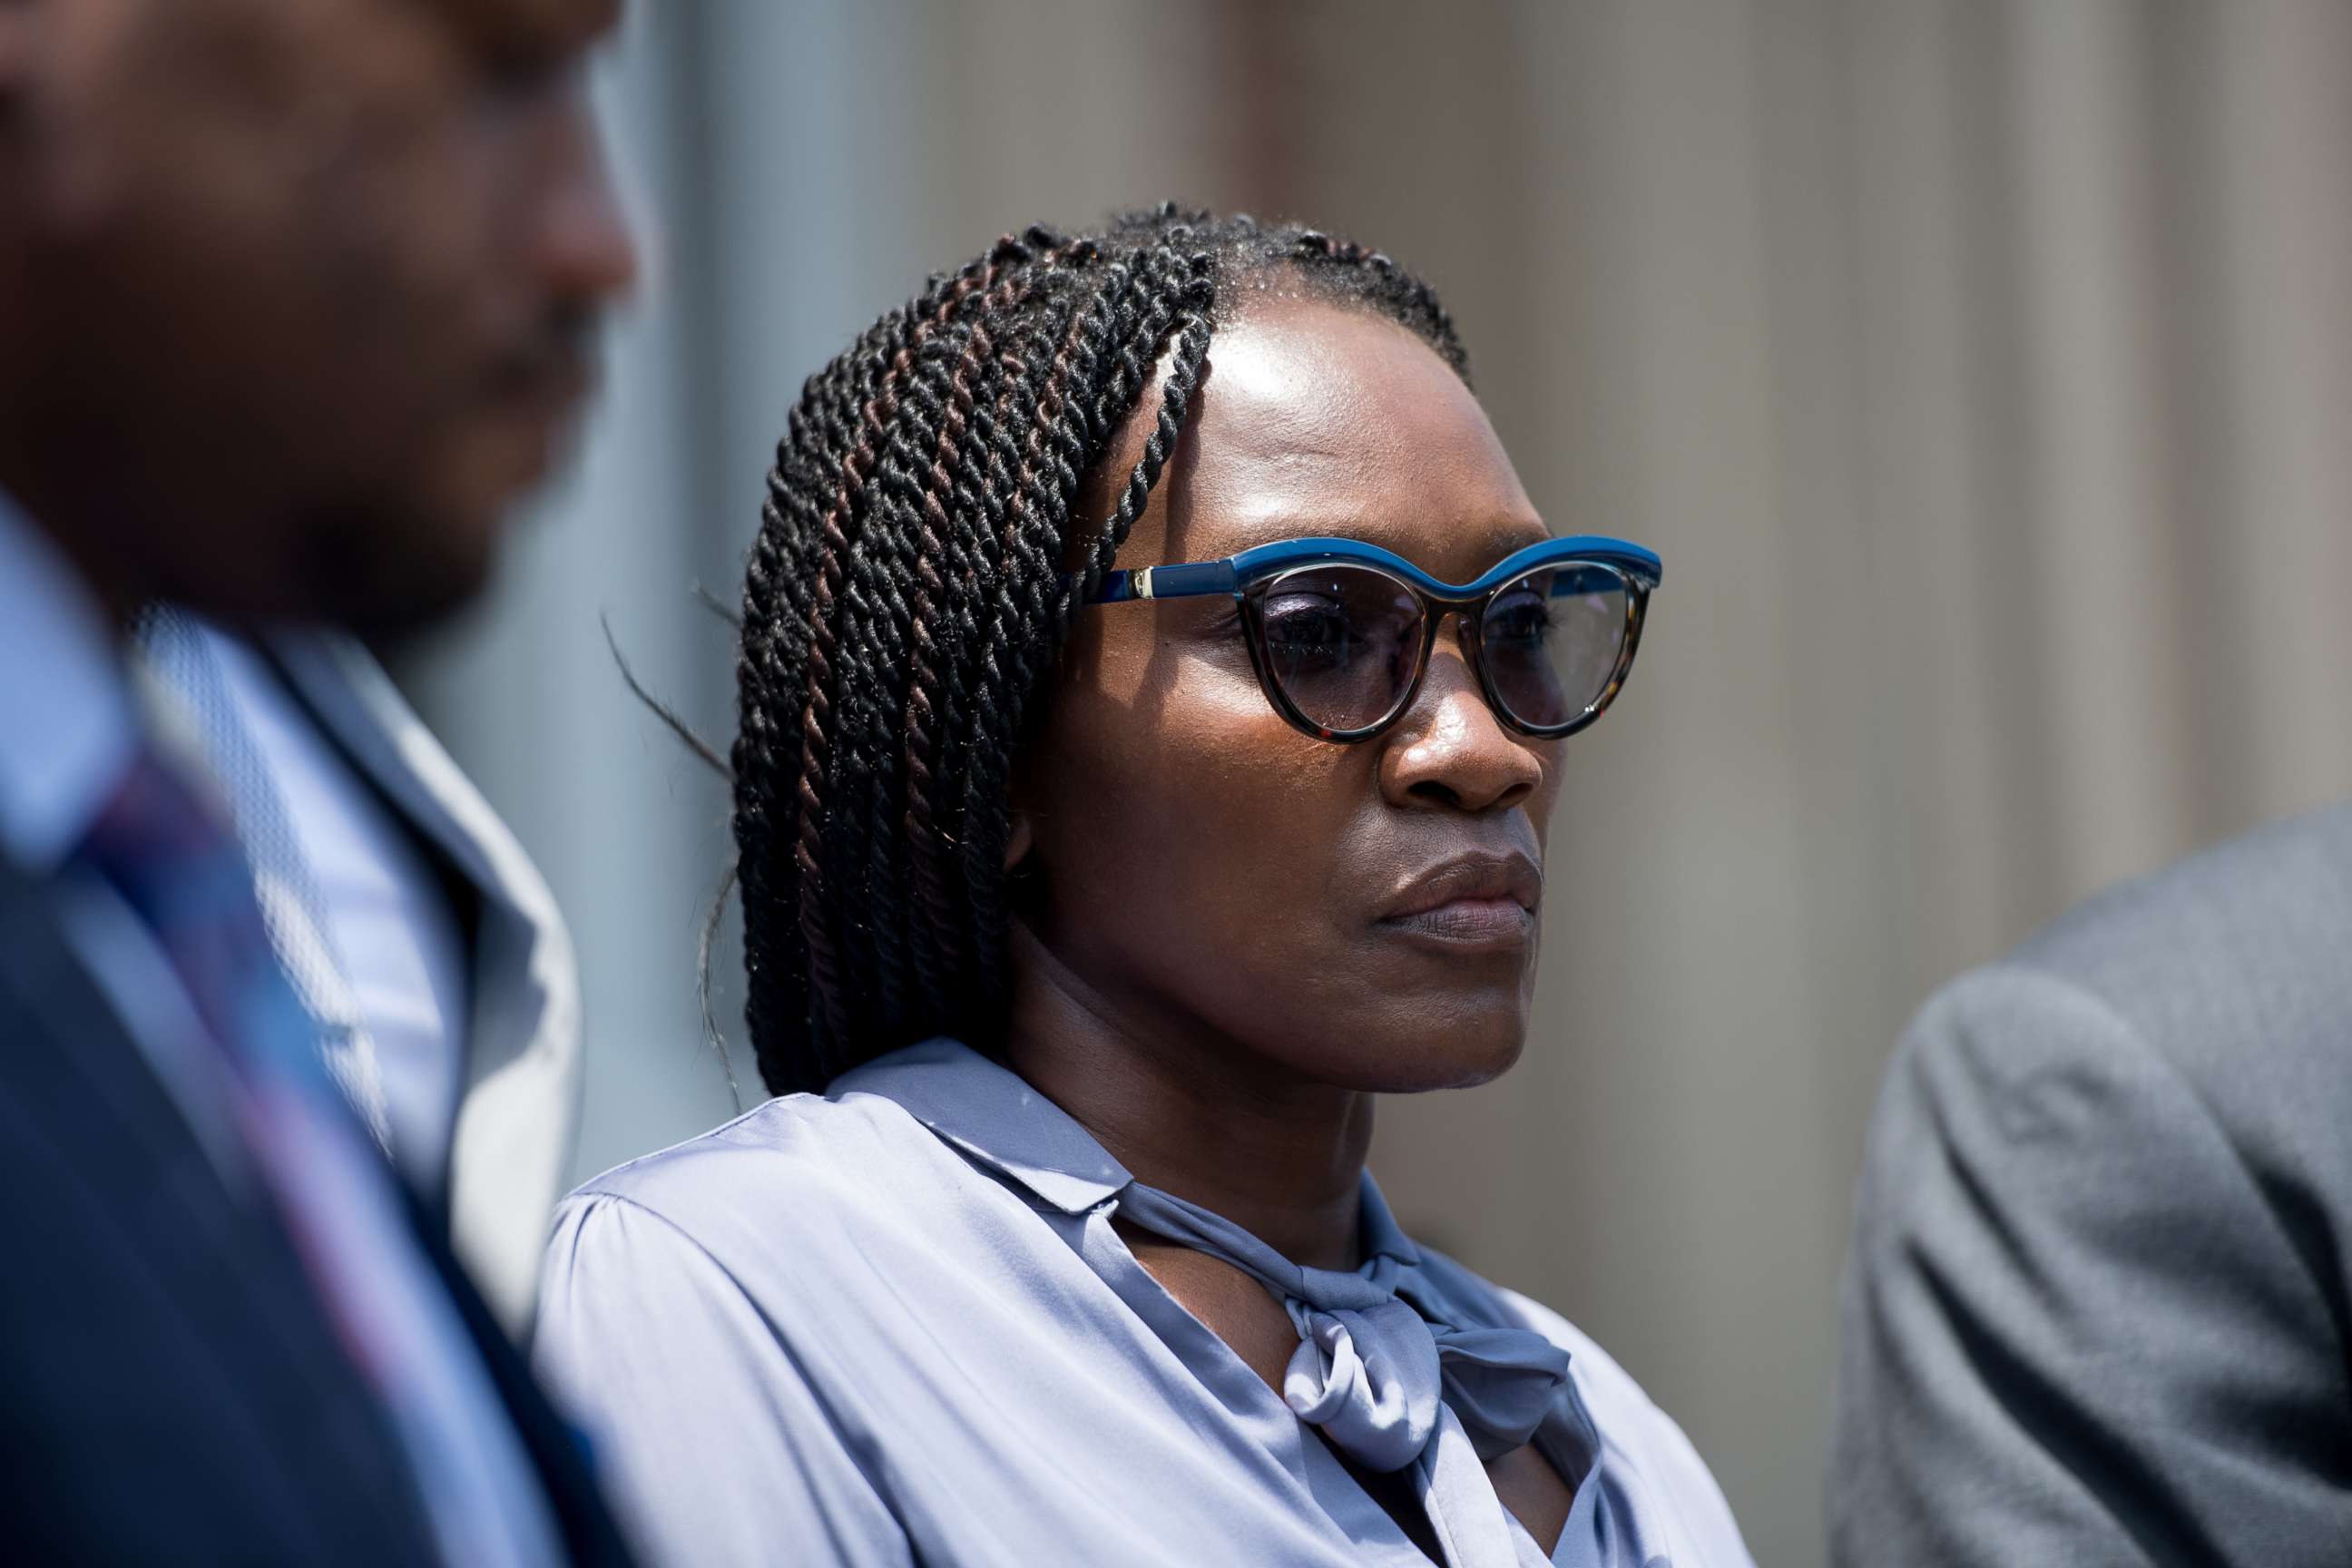 PHOTO: Wanda Cooper-Jones, mother of Ahmaud Arbery, listens as attorneys speak outside the Glynn County Courthouse on July 17, 2020 in Brunswick, Georgia.